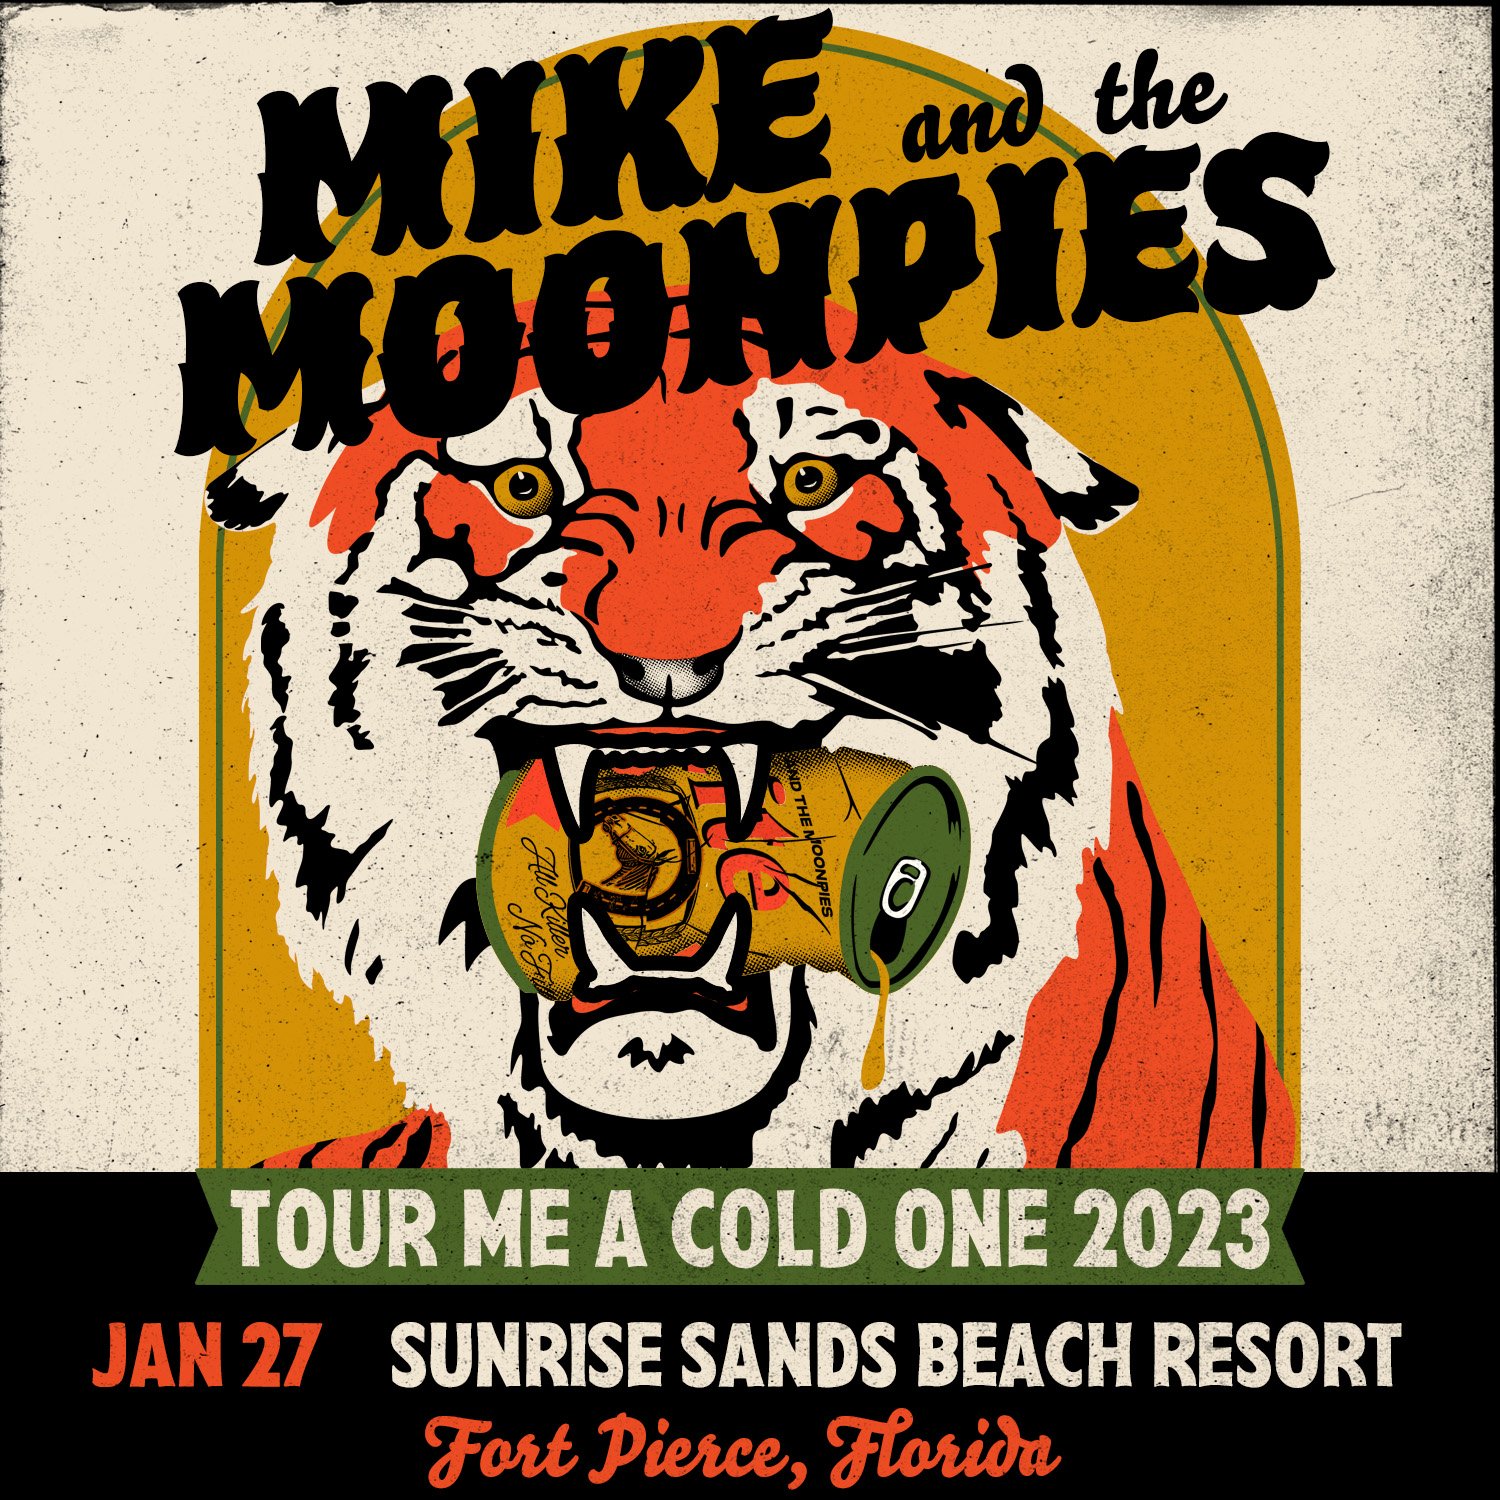 Mike and the Moonpies in Fort Pierce!!